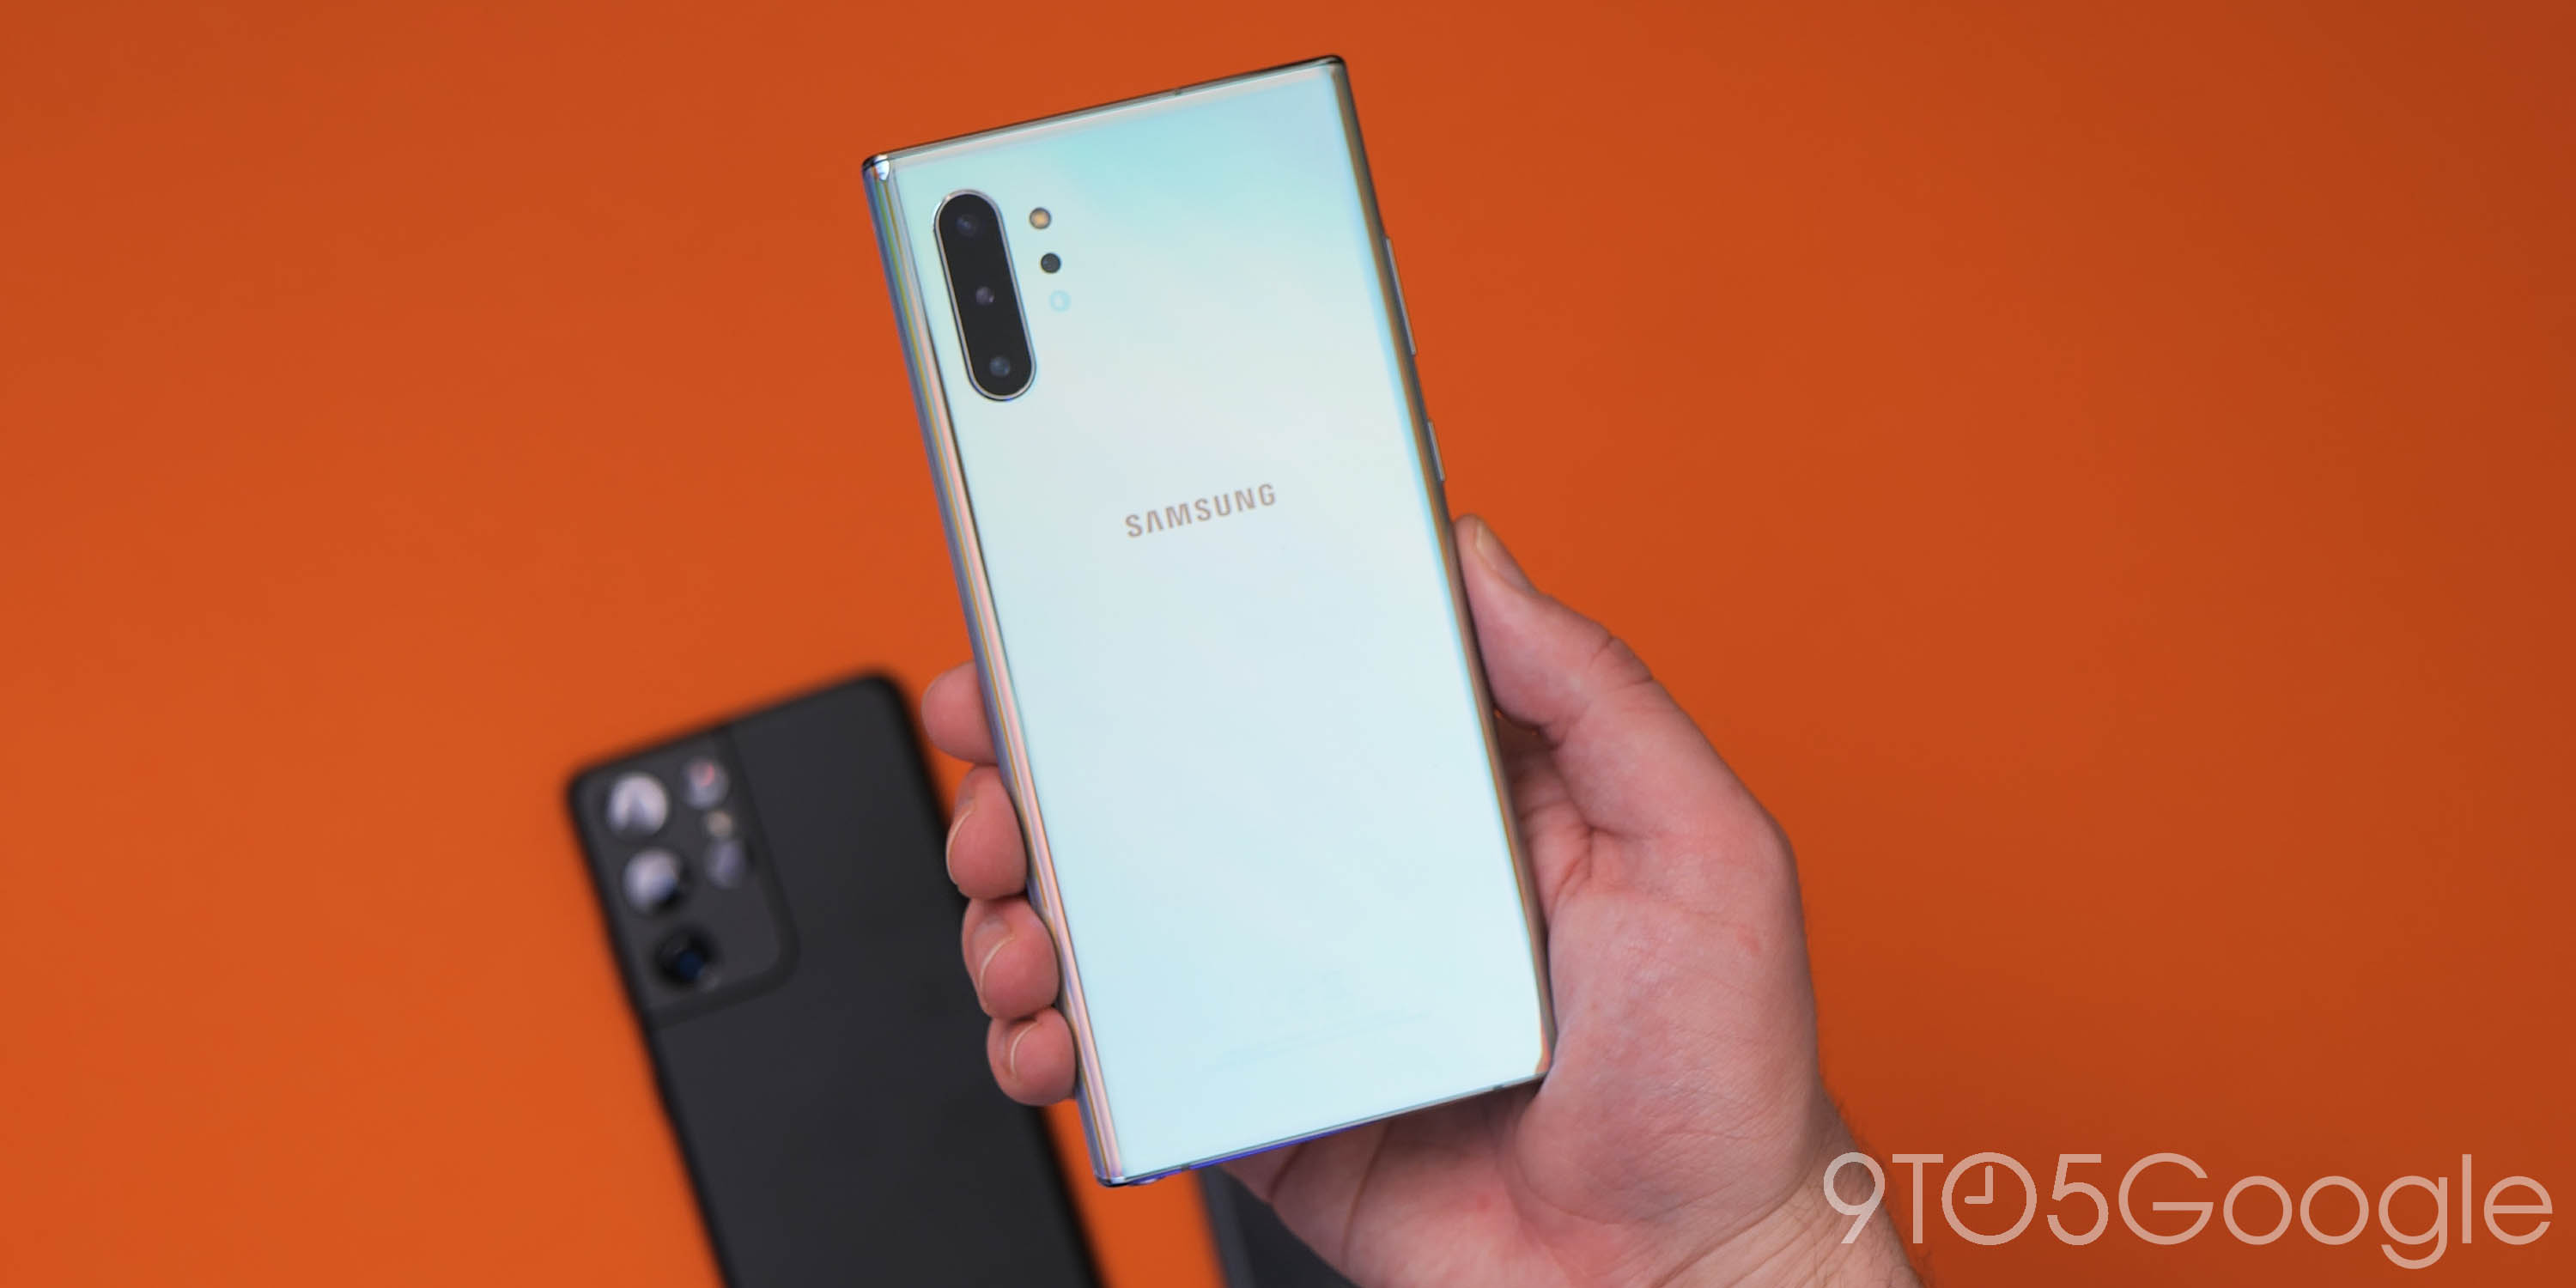 Samsung Galaxy Note 10 receiving February 2022 security update